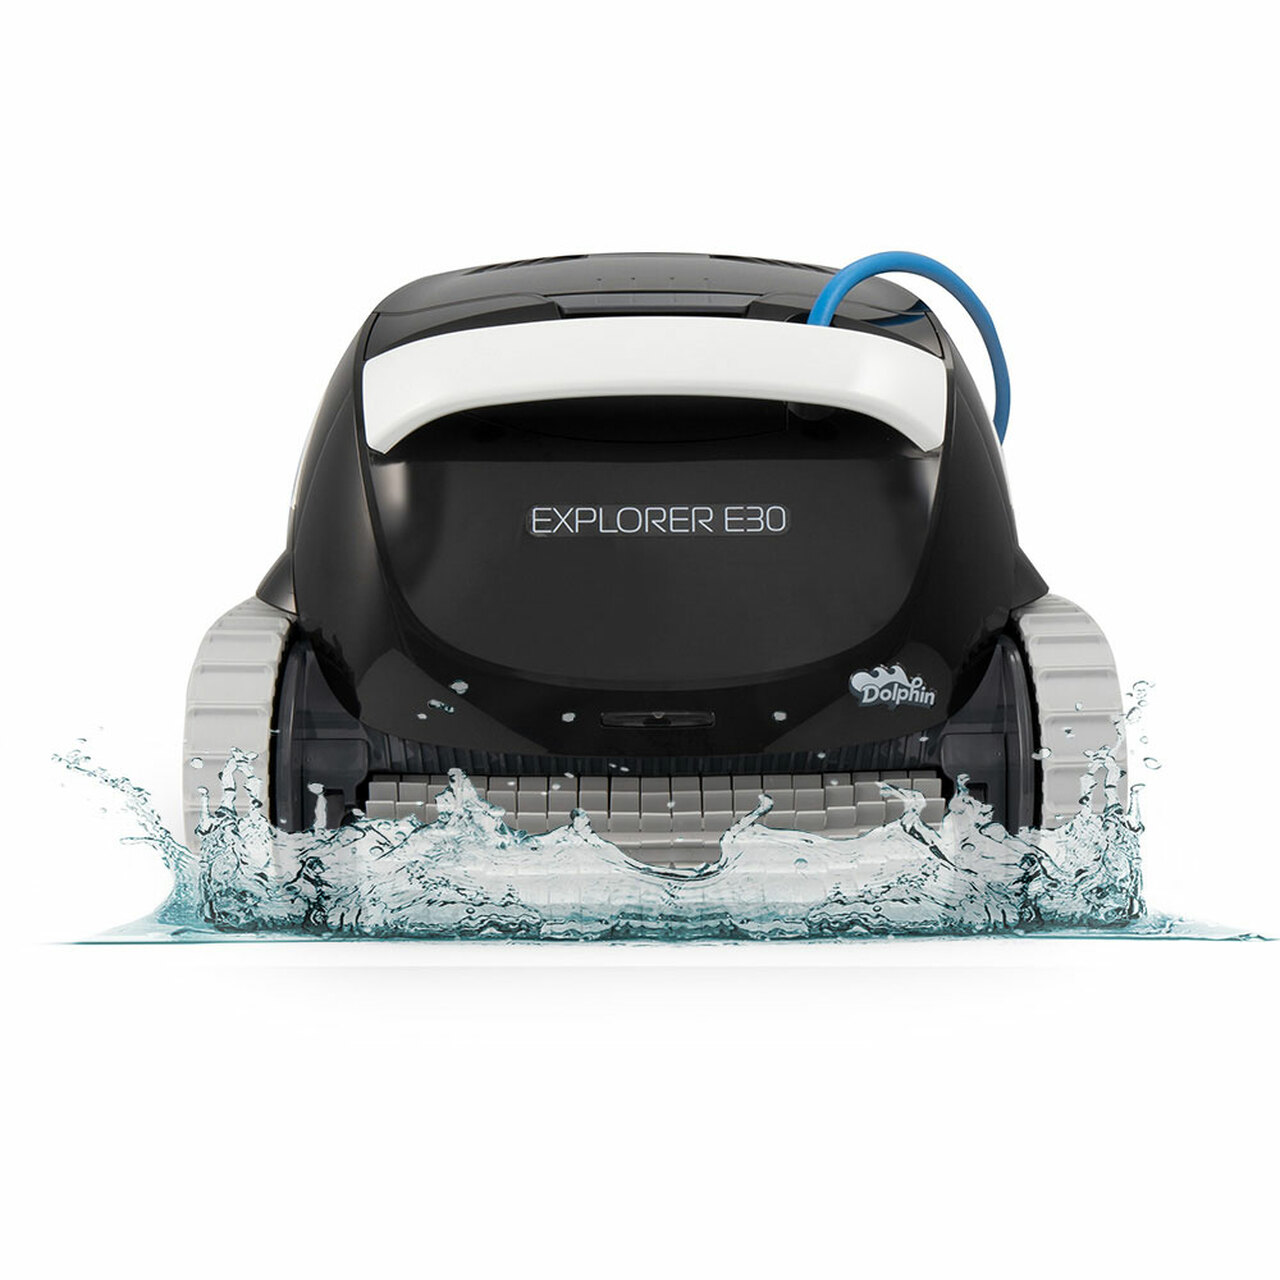 Dolphin e30 Robotic Pool Cleaner by Matronics